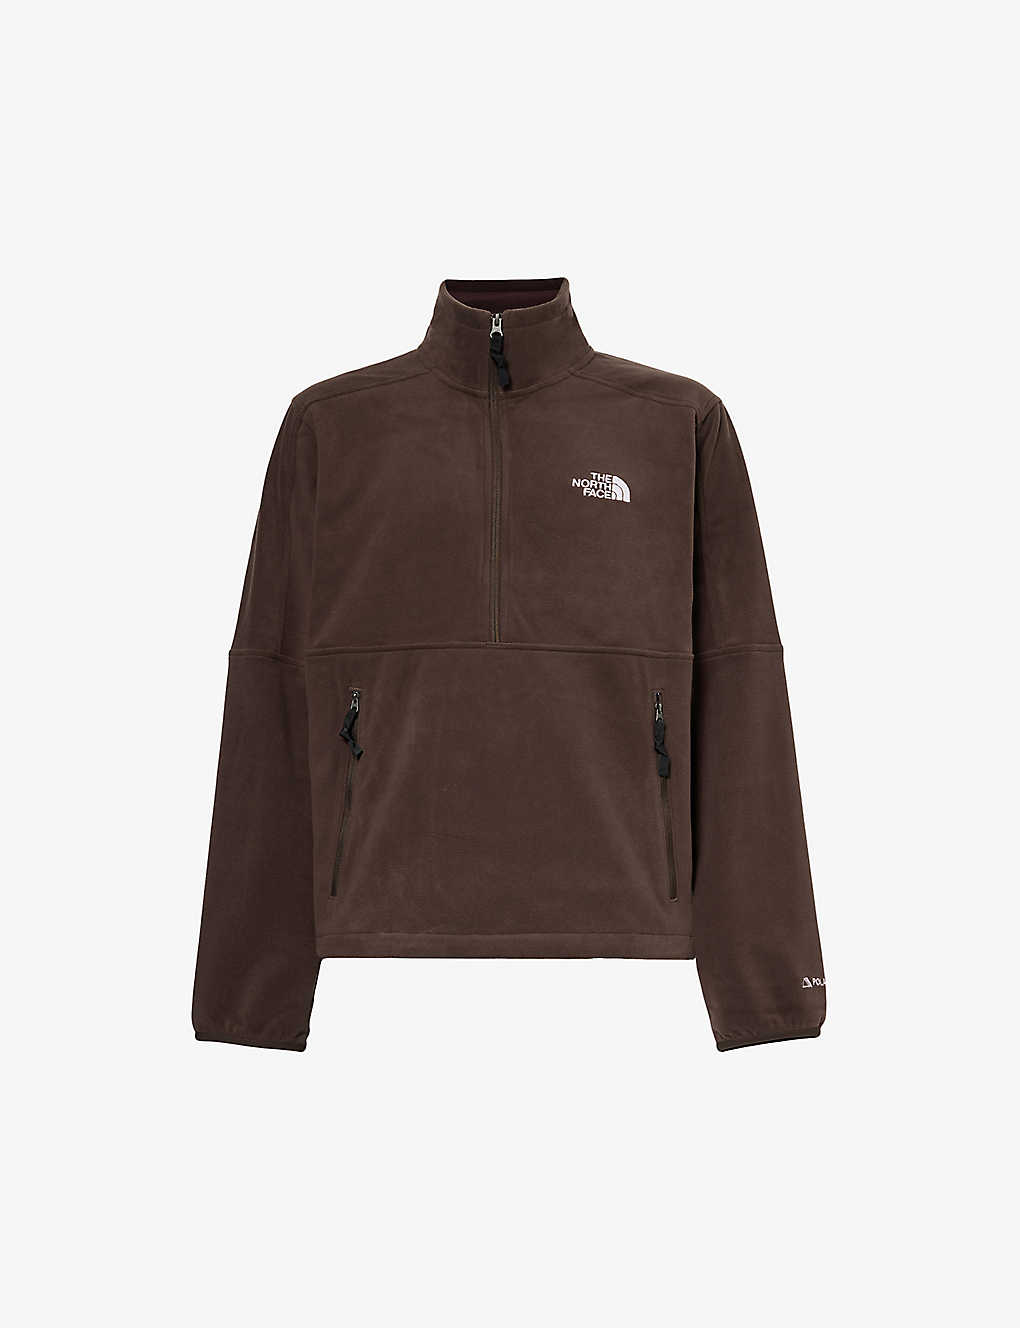 THE NORTH FACE THE NORTH FACE MENS COAL BROWN LOGO-EMBROIDERED FUNNEL-NECK FLEECE SWEATSHIRT